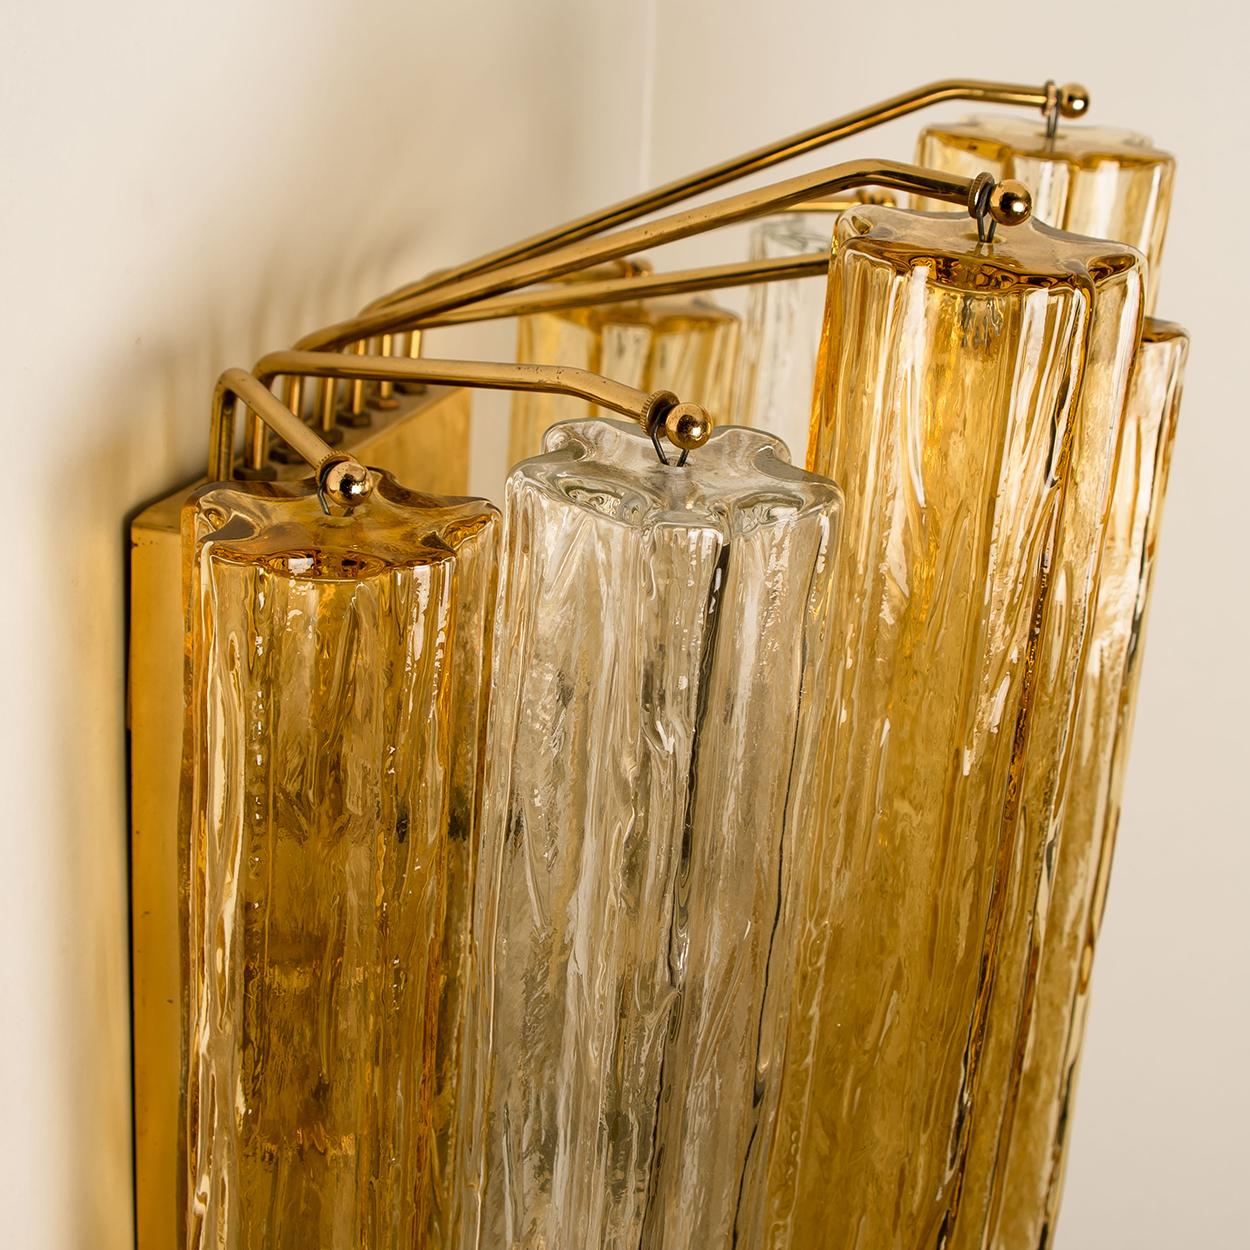 Mid-Century Modern 1 of the 2 Extra Large Wall Sconces or Wall Lights Murano Glass, Barovier & Toso